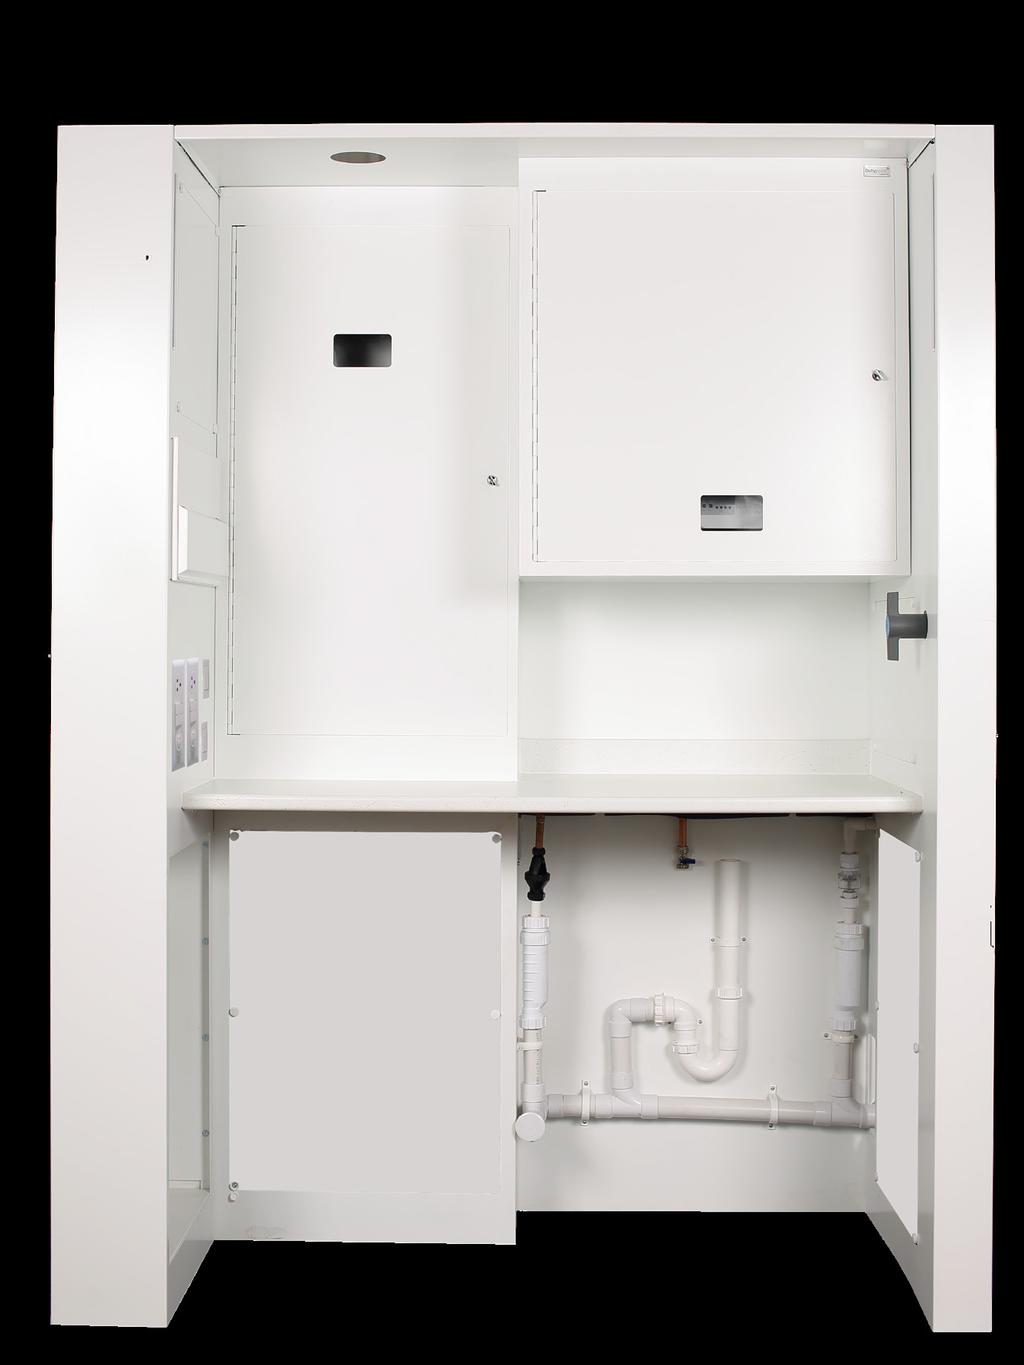 Key features. The packaged utility room from Dutypoint allows developers to reduce costs, designers to save floor space and contractors to save time on site.